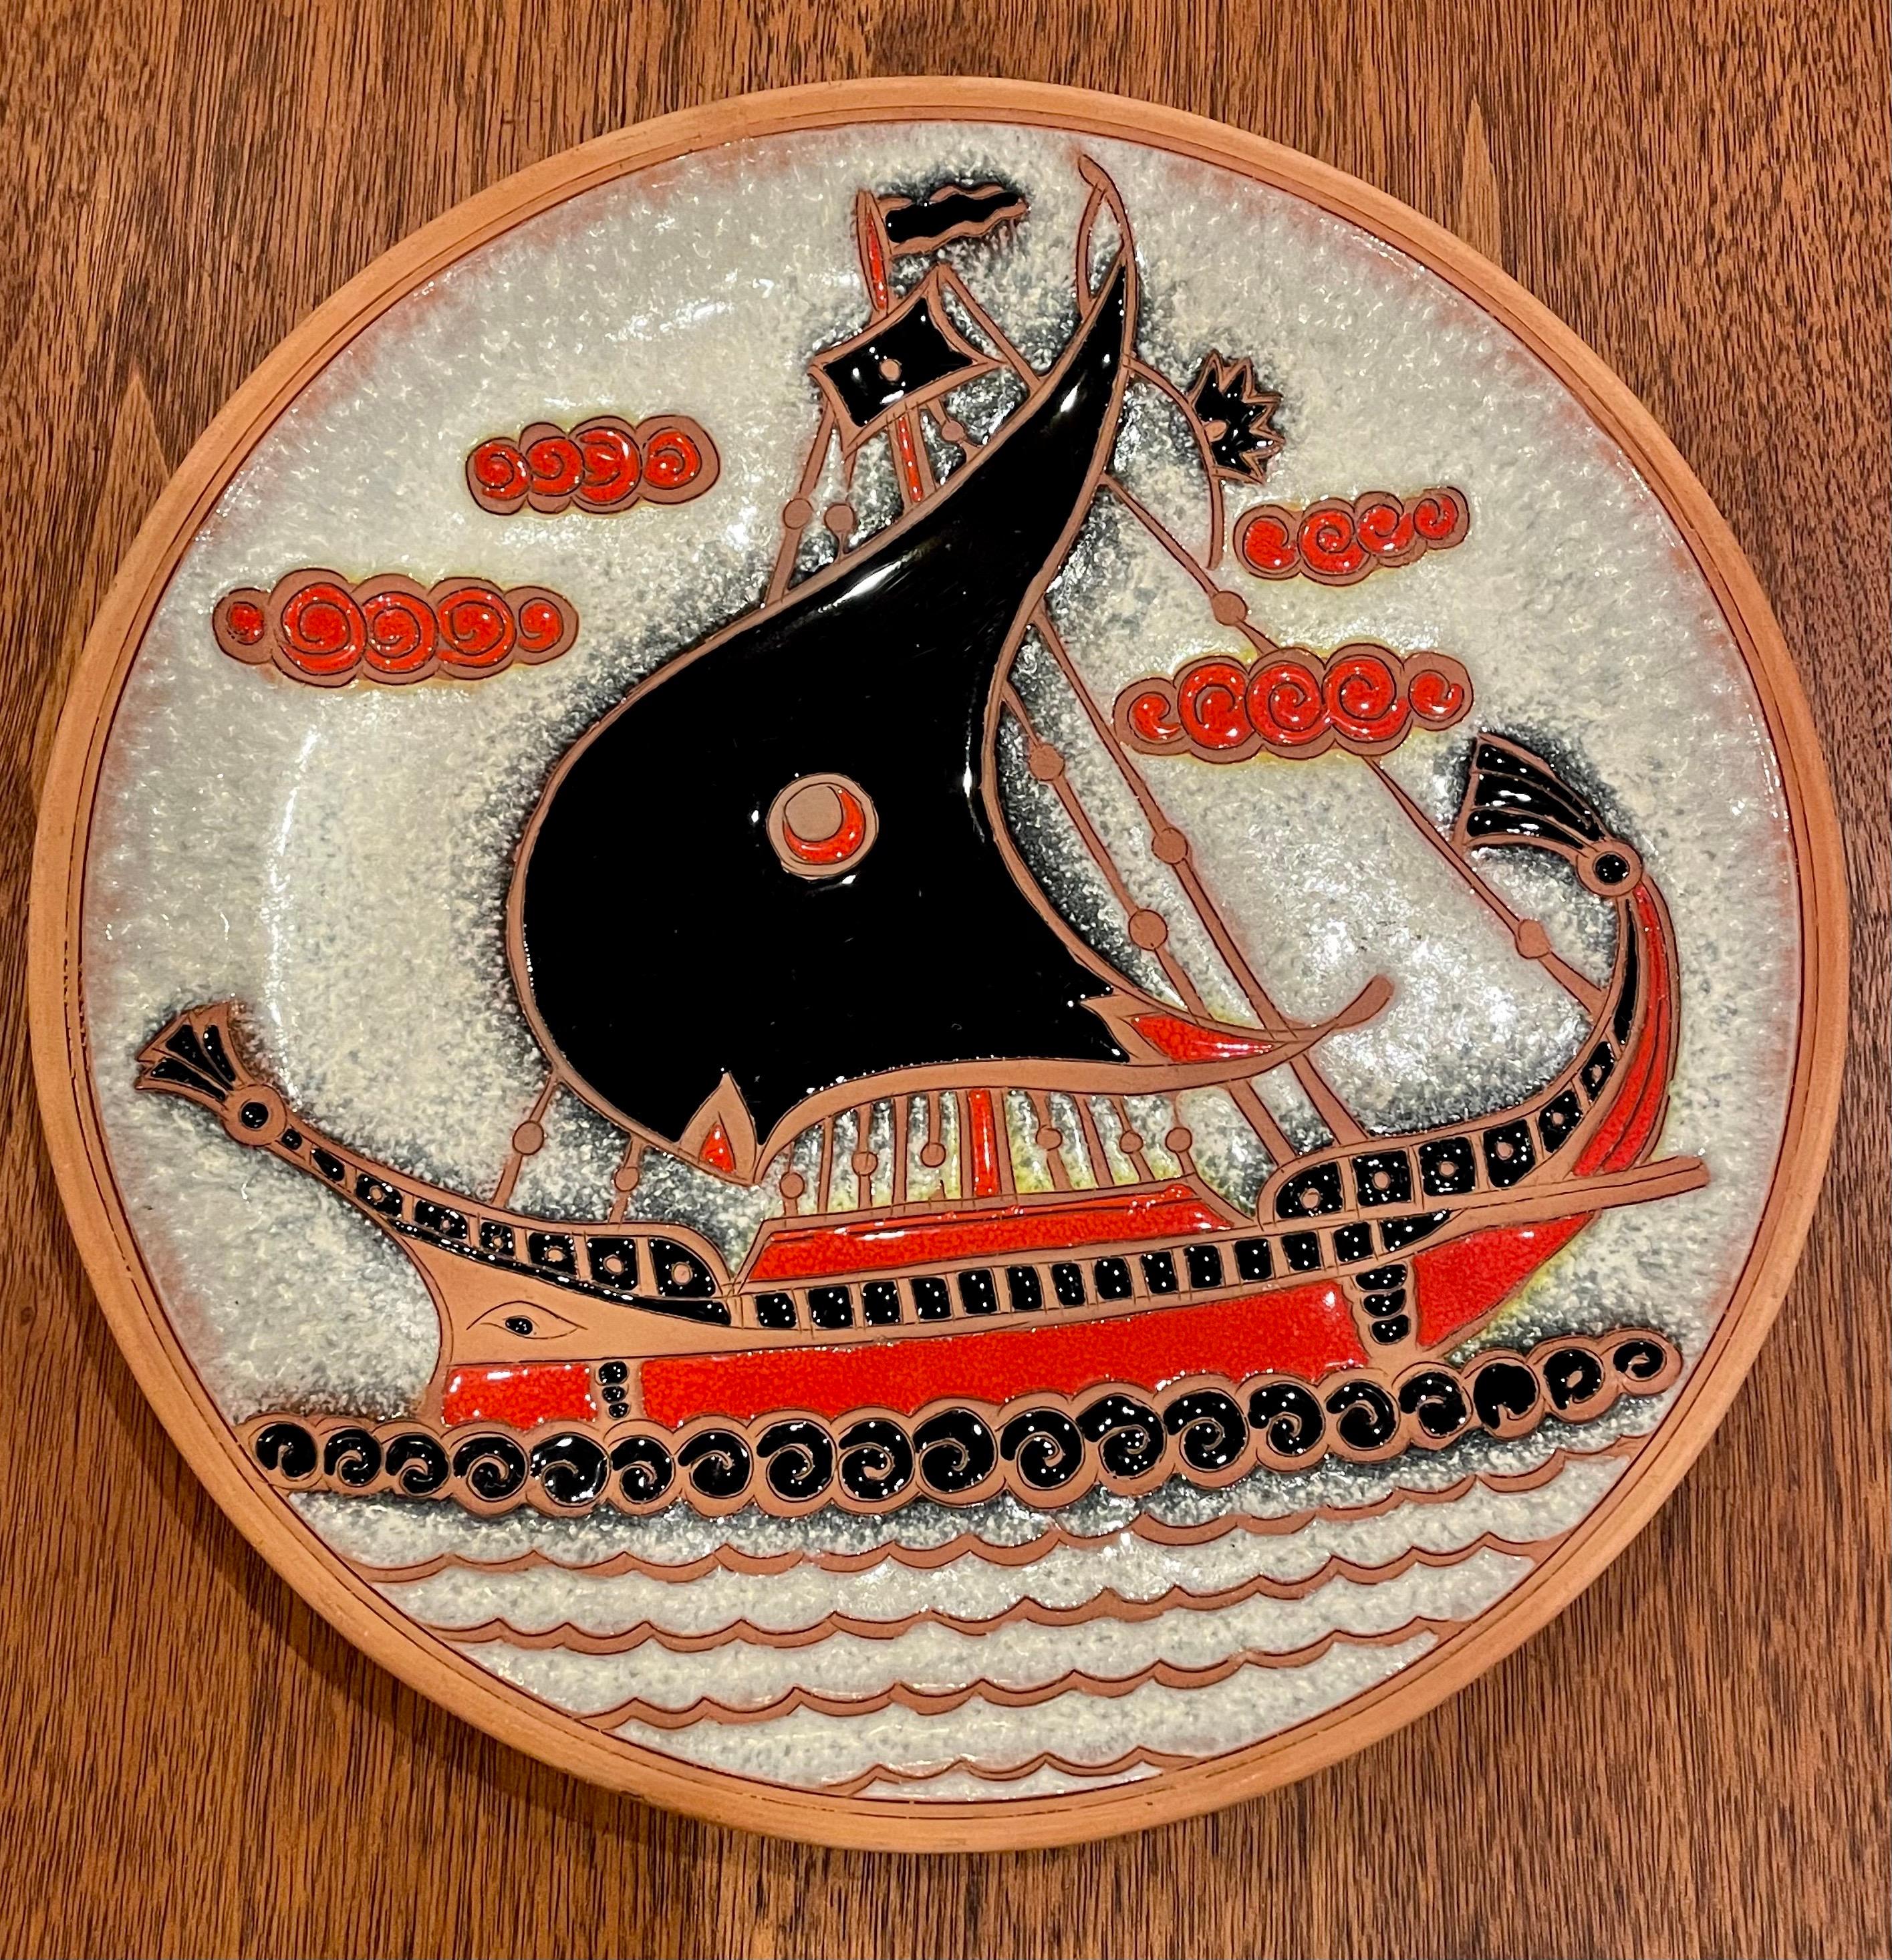 Beautiful hand-painted Viking ship decorative plate circa 1970's made in Greece.